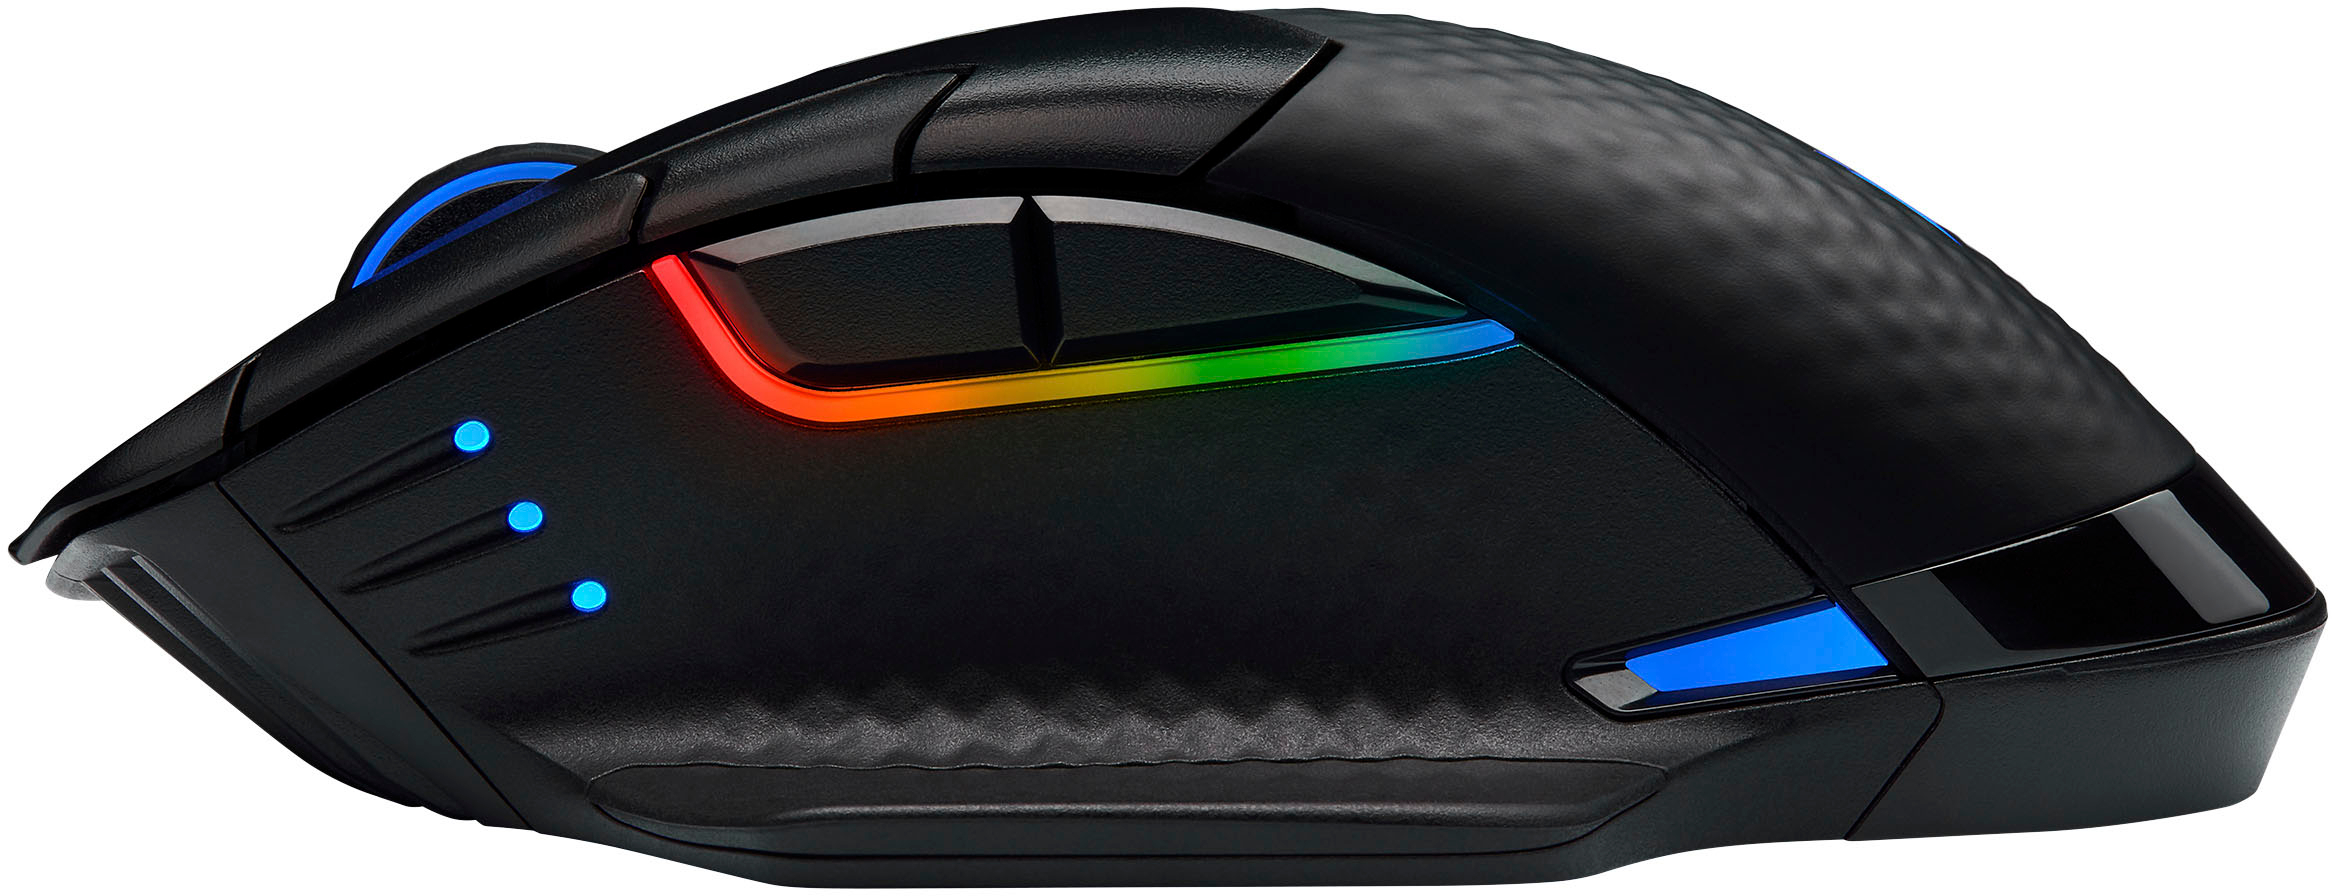 boble ammunition æggelederne CORSAIR DARK CORE RGB PRO SE Wireless Optical Gaming Mouse with Qi Wireless  Charging Black CH-9315511-NA - Best Buy